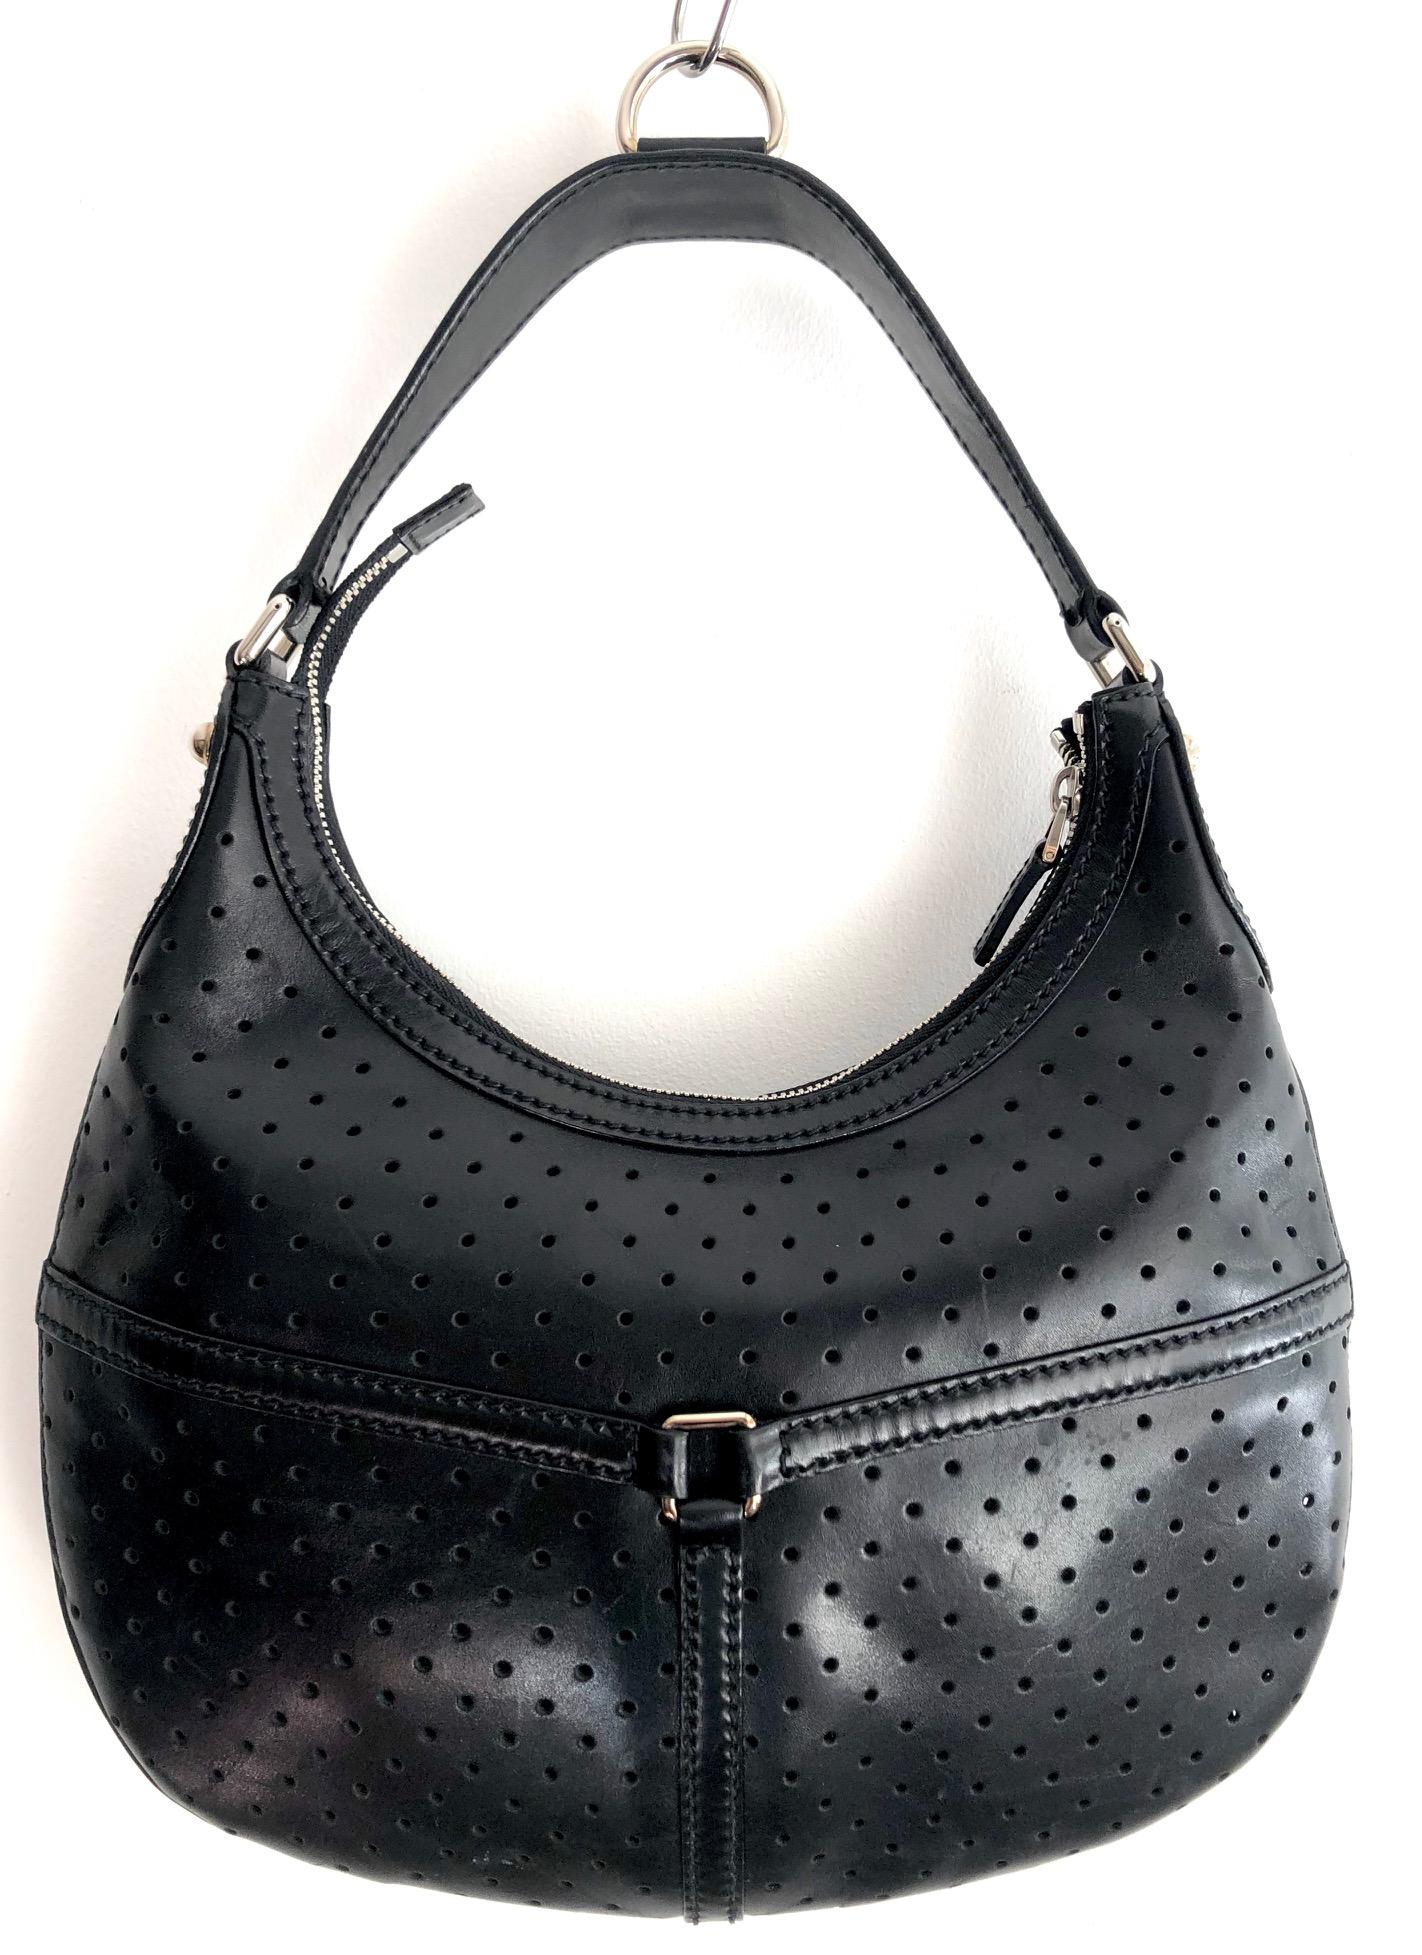 FREE UK and WORLDWIDE DELIVERY 

Gucci black leather GG hobo bag, frontal GG metal logo in silver tone, zip closure, inside zipped pocket 
Condition: vintage, 1990s, like new 
Measurements: 60x40x6cm, medium